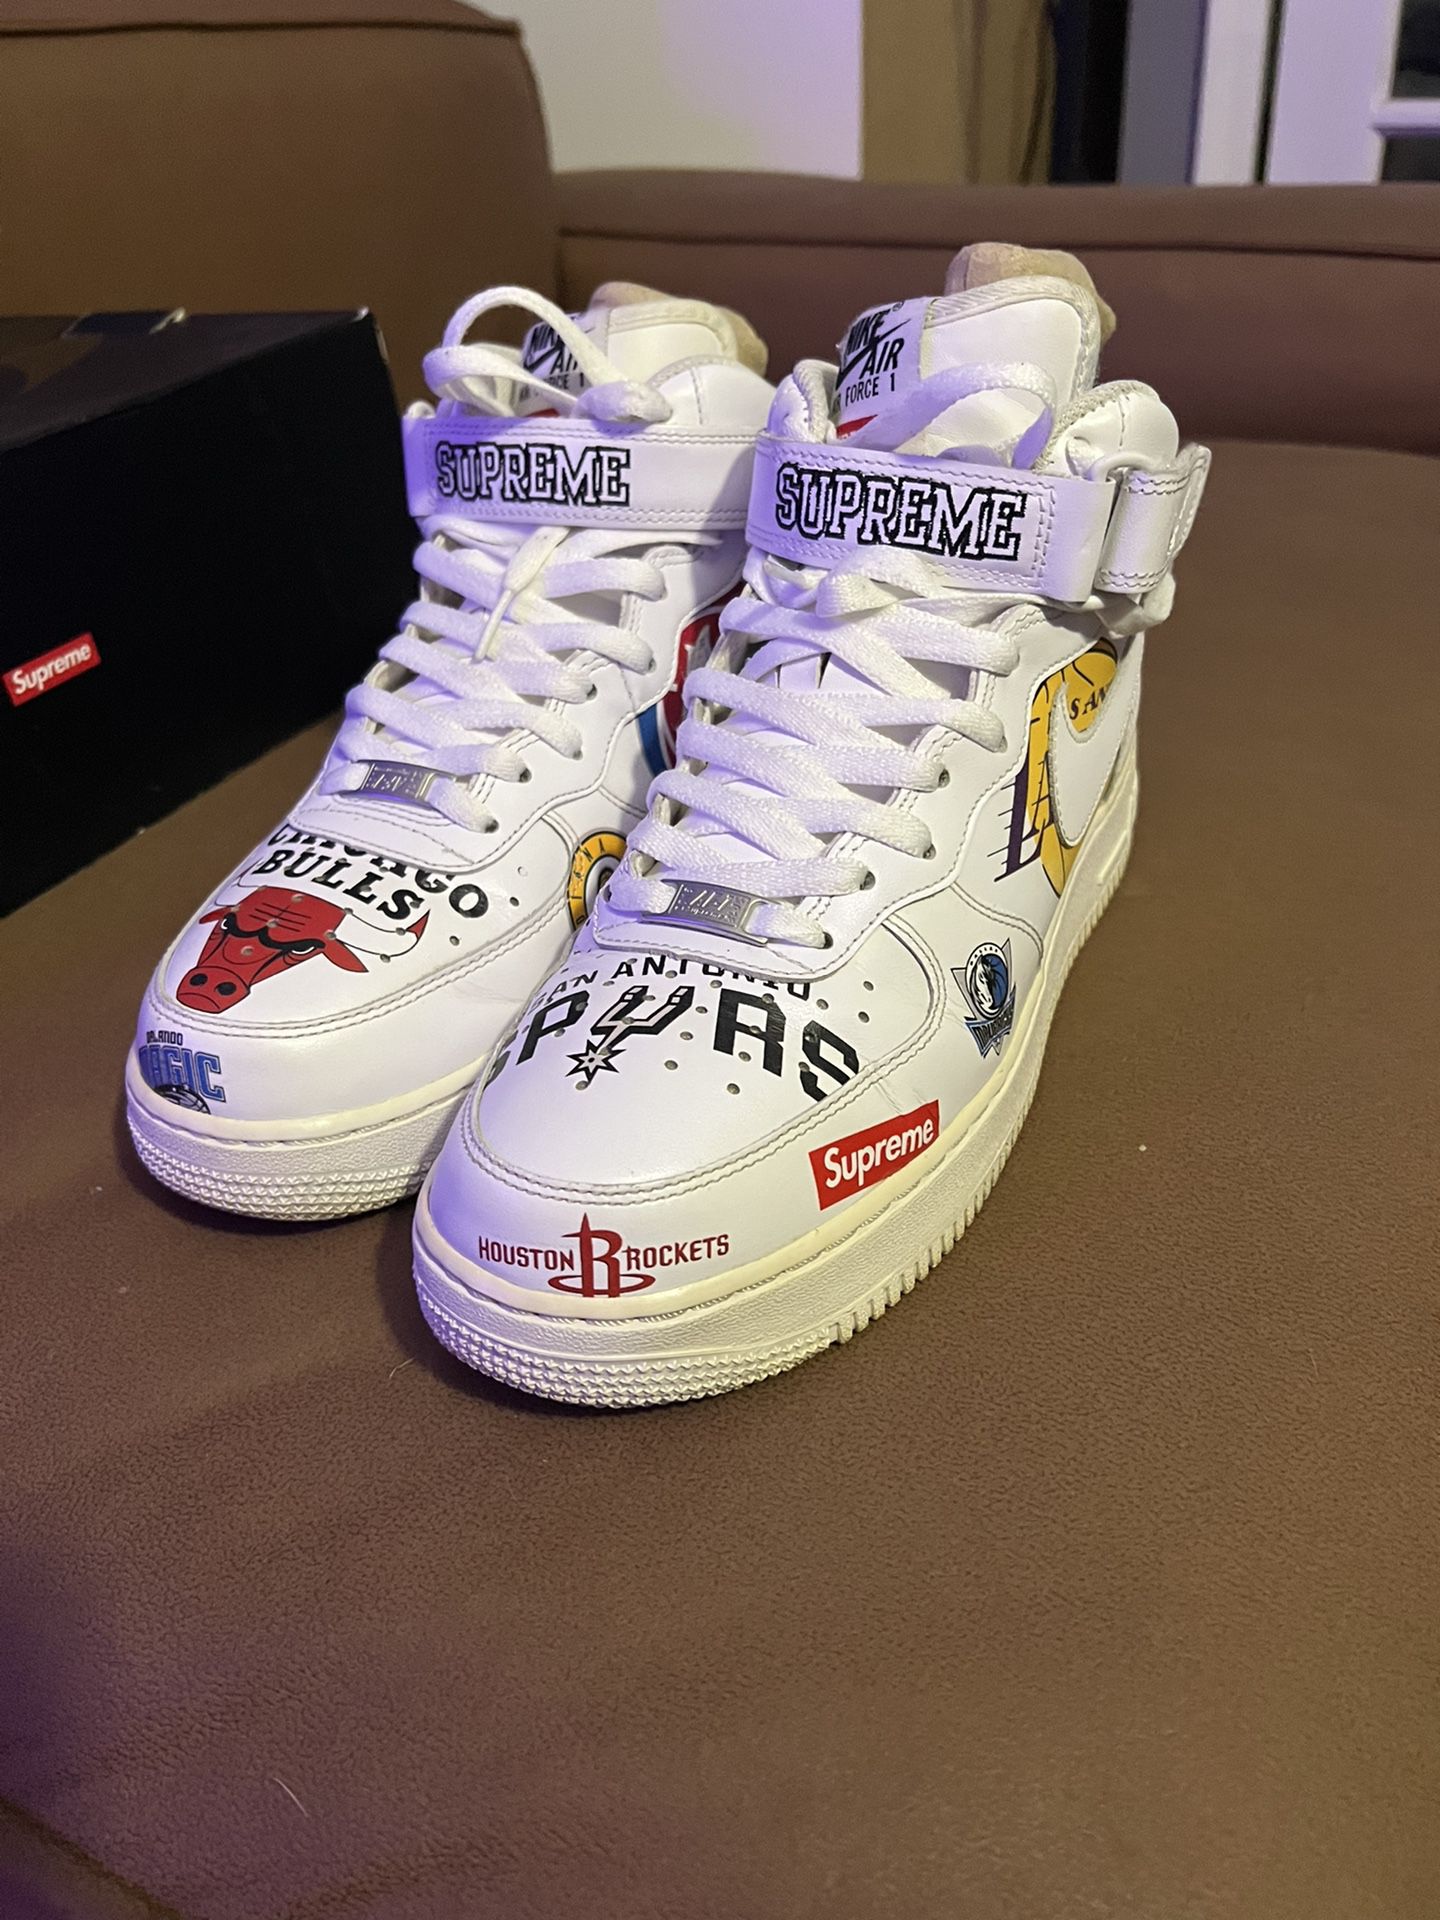 Electrizar Susteen sugerir Supreme NBA Air Force One Size 9 for Sale in Whittier, CA - OfferUp